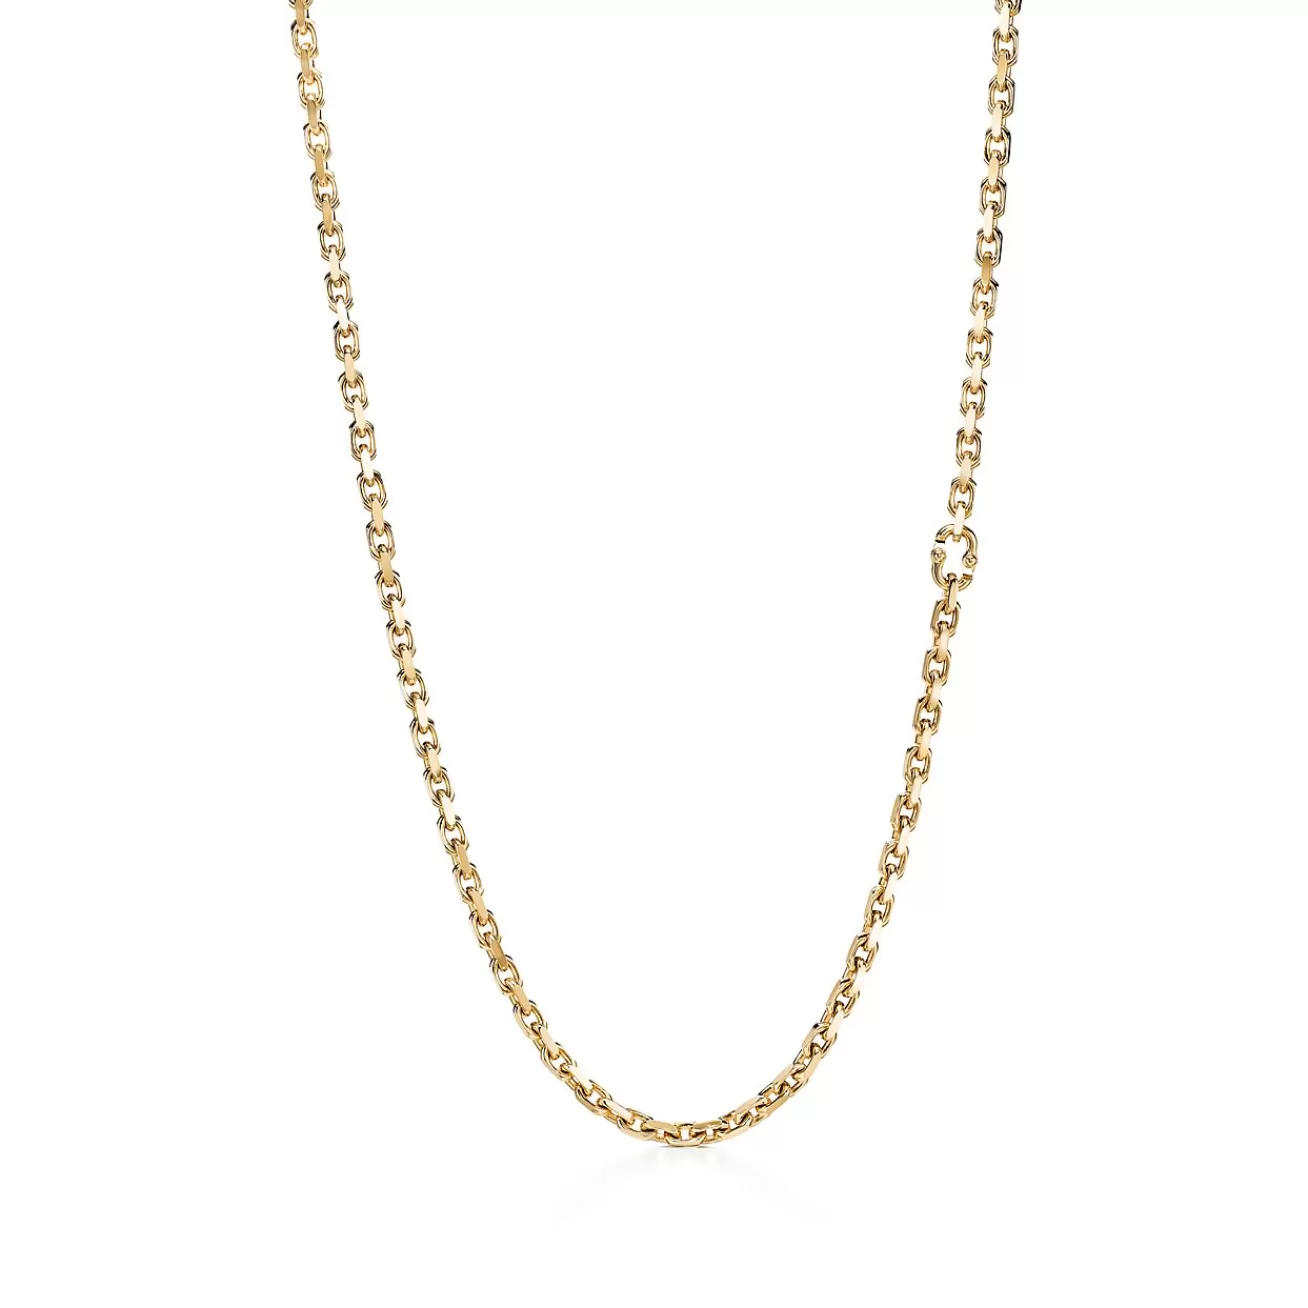 Tiffany & Co. Tiffany 1837® Makers chain necklace in 18k gold, 24". | ^ Necklaces & Pendants | Men's Jewelry